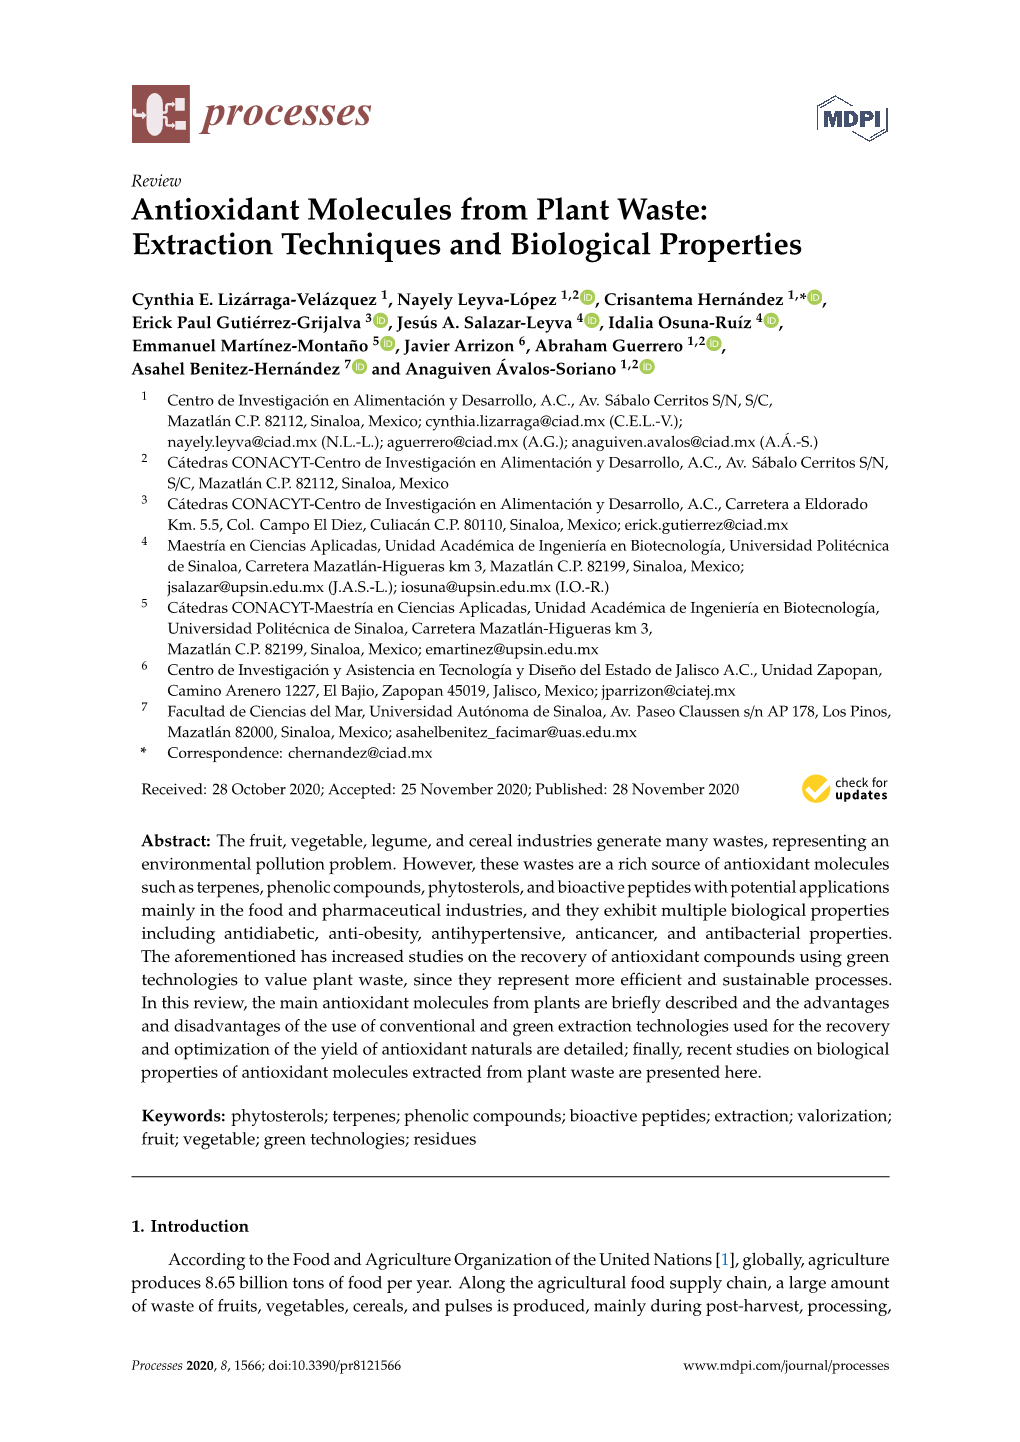 Antioxidant Molecules from Plant Waste: Extraction Techniques and Biological Properties